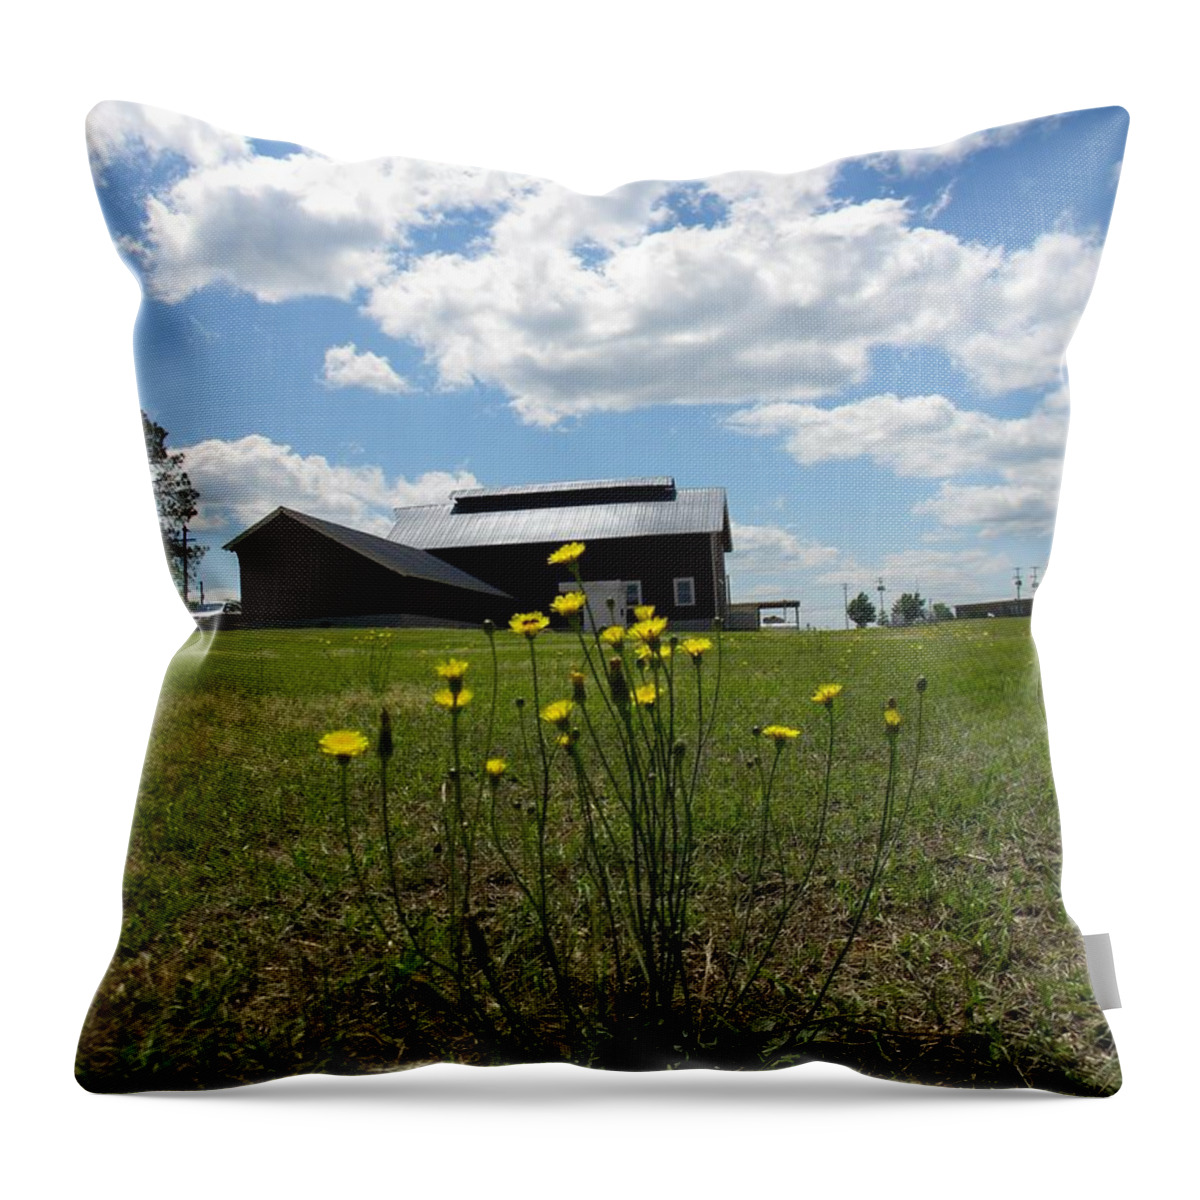 Spring Throw Pillow featuring the photograph Spring On The Old Farm by Matthew Seufer